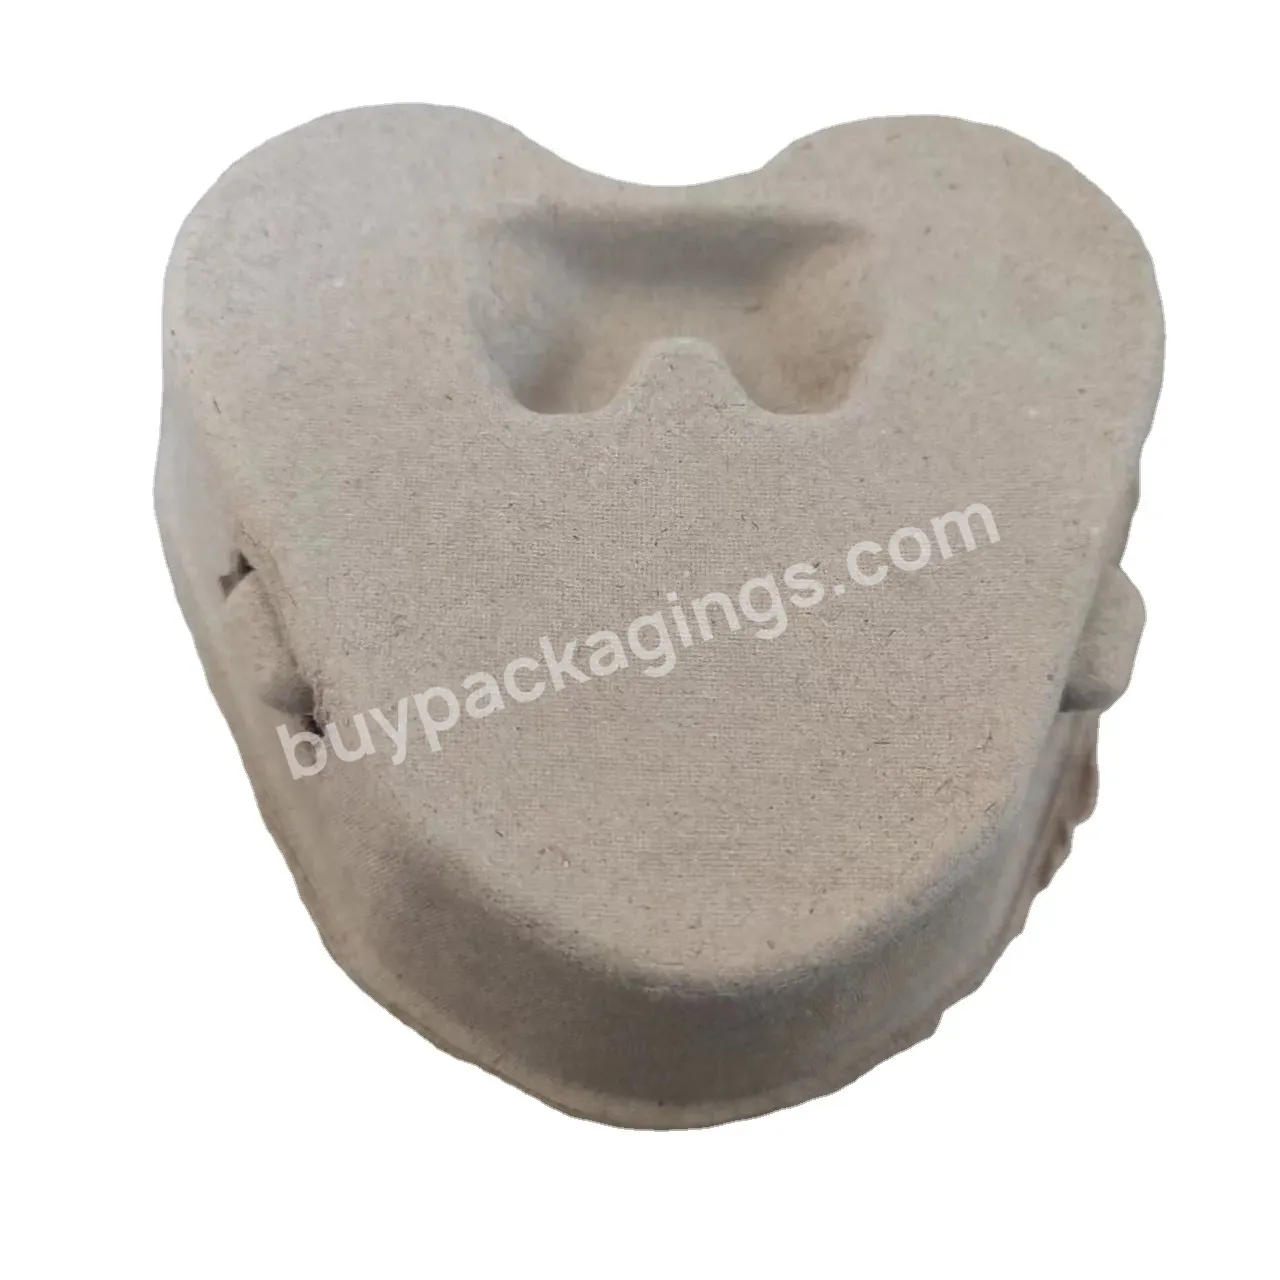 Pulp Carrier Eggs Quail Egg Cartons Sold In 3-cell Heart-shaped Environmentally Degradable Packaging - Buy Cup Carrier,Cup Holder,Holder Tray Product.